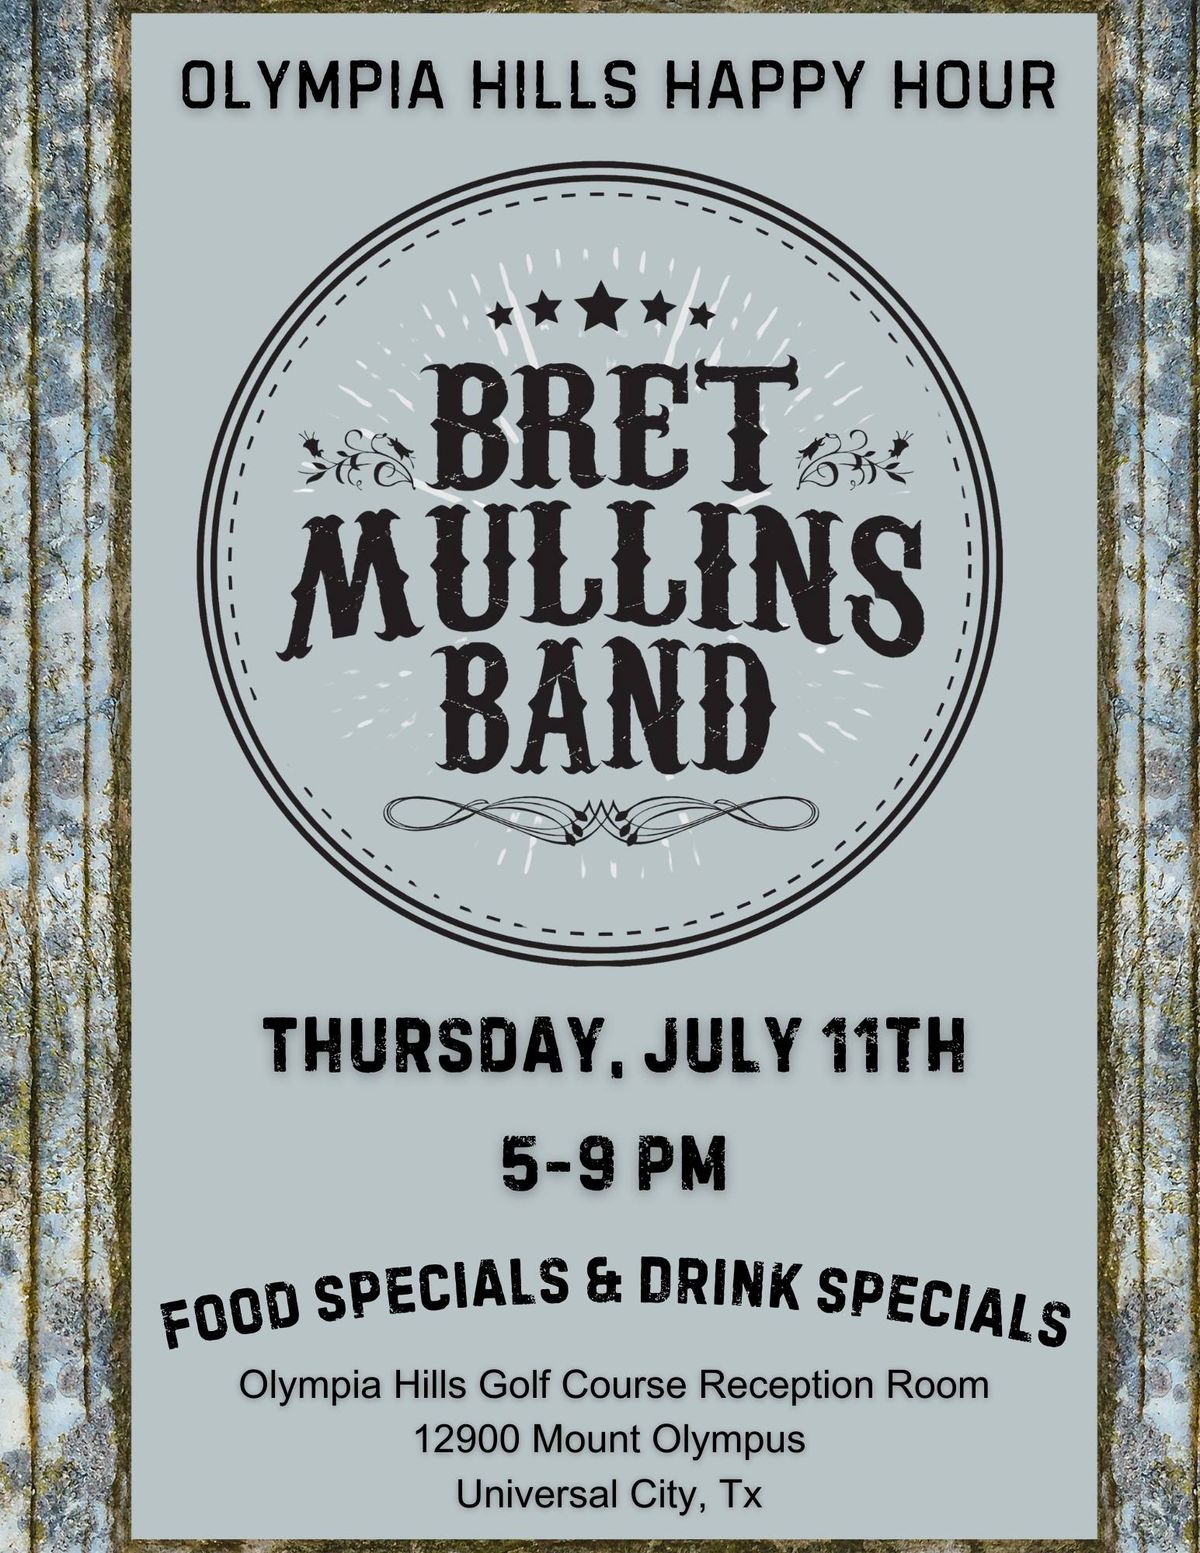 Olympia Hills Country Night! *Bret Mullins Band*